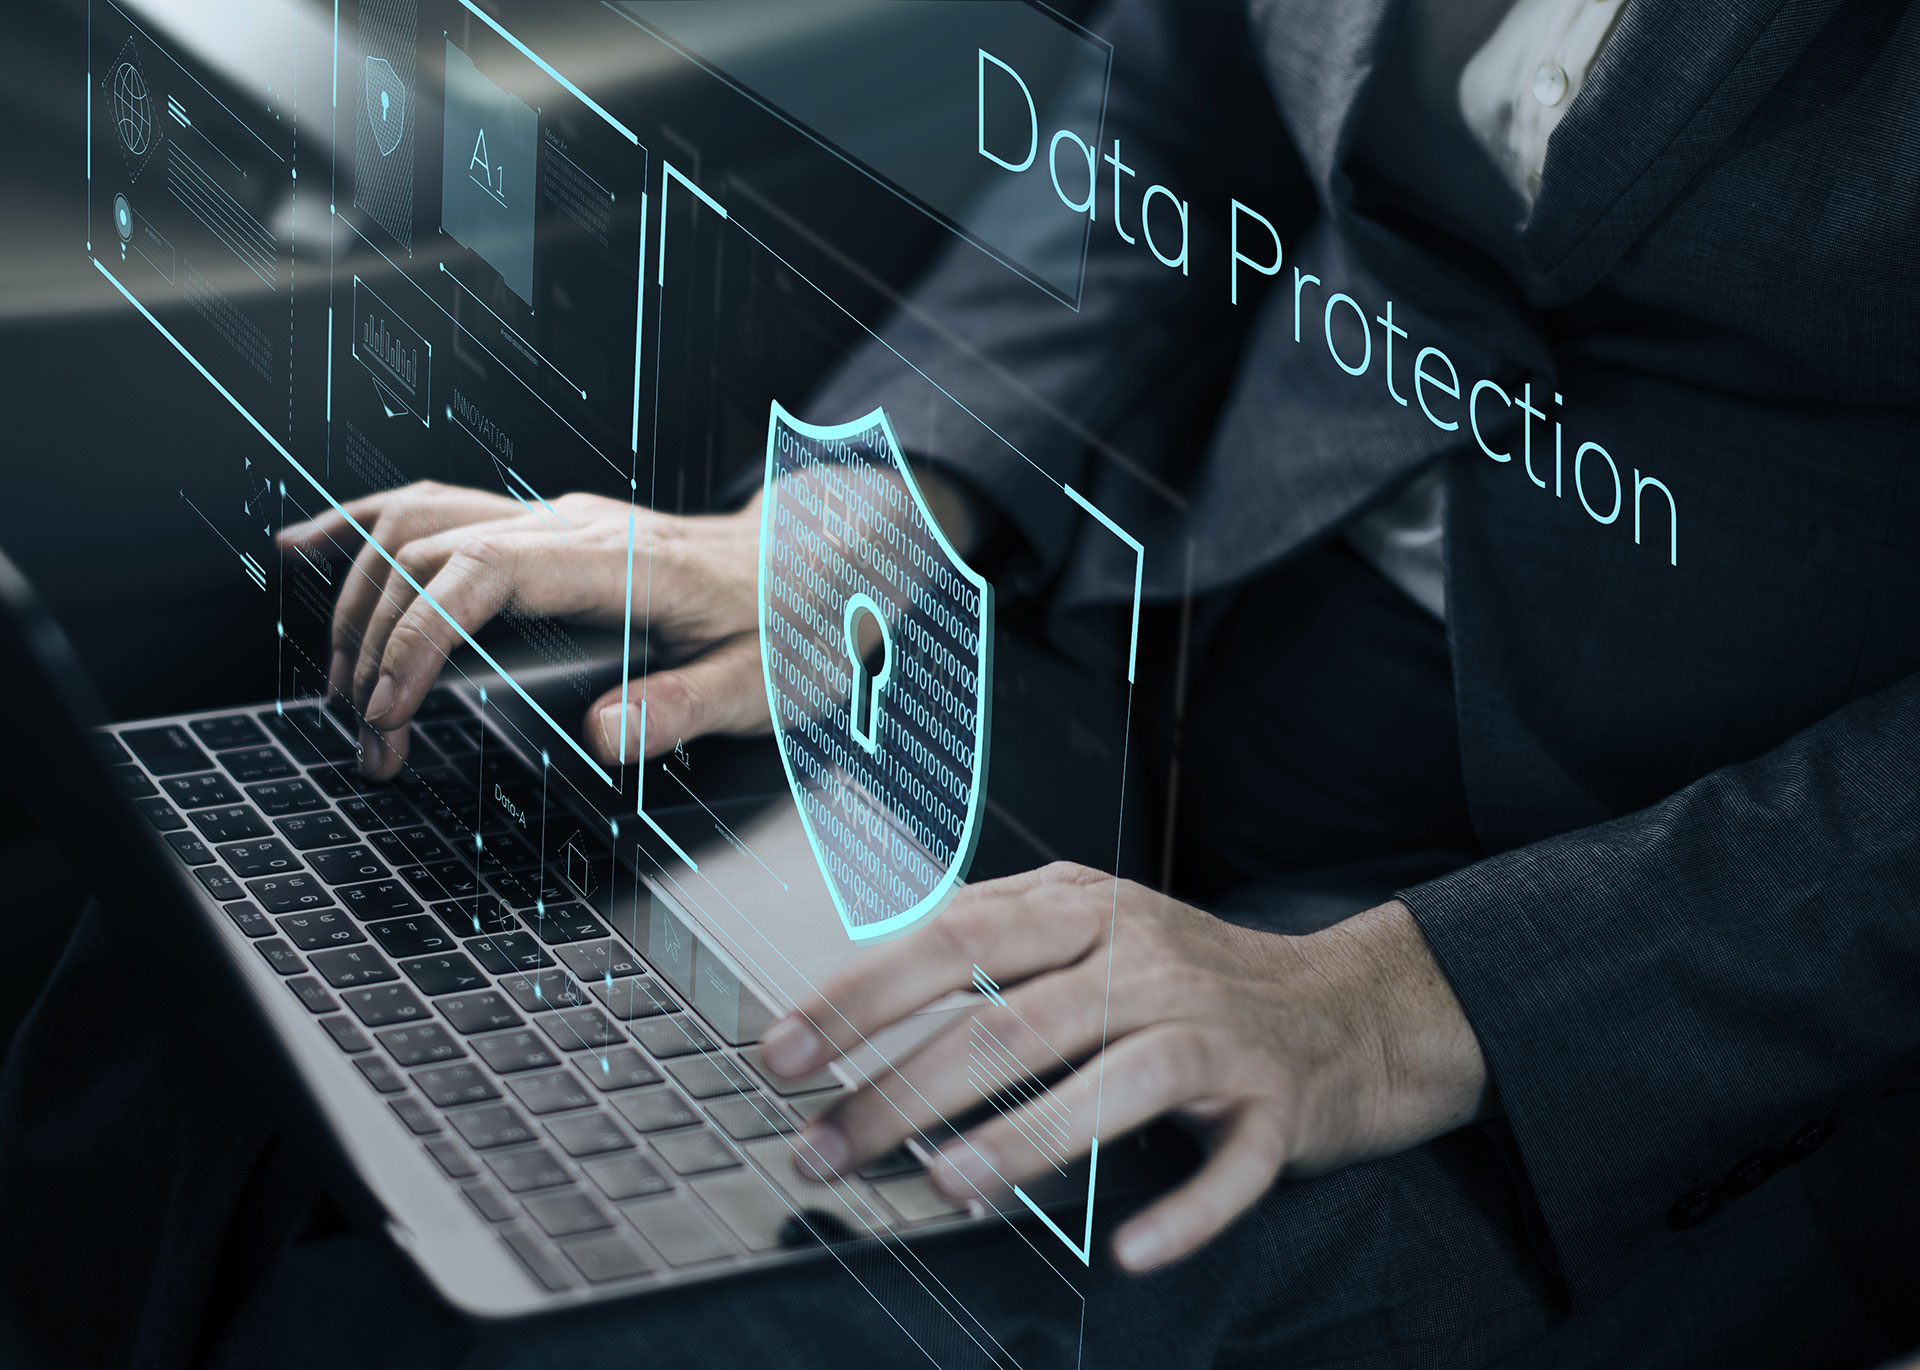 PDPP – Privacy and Data Protection Practitioner